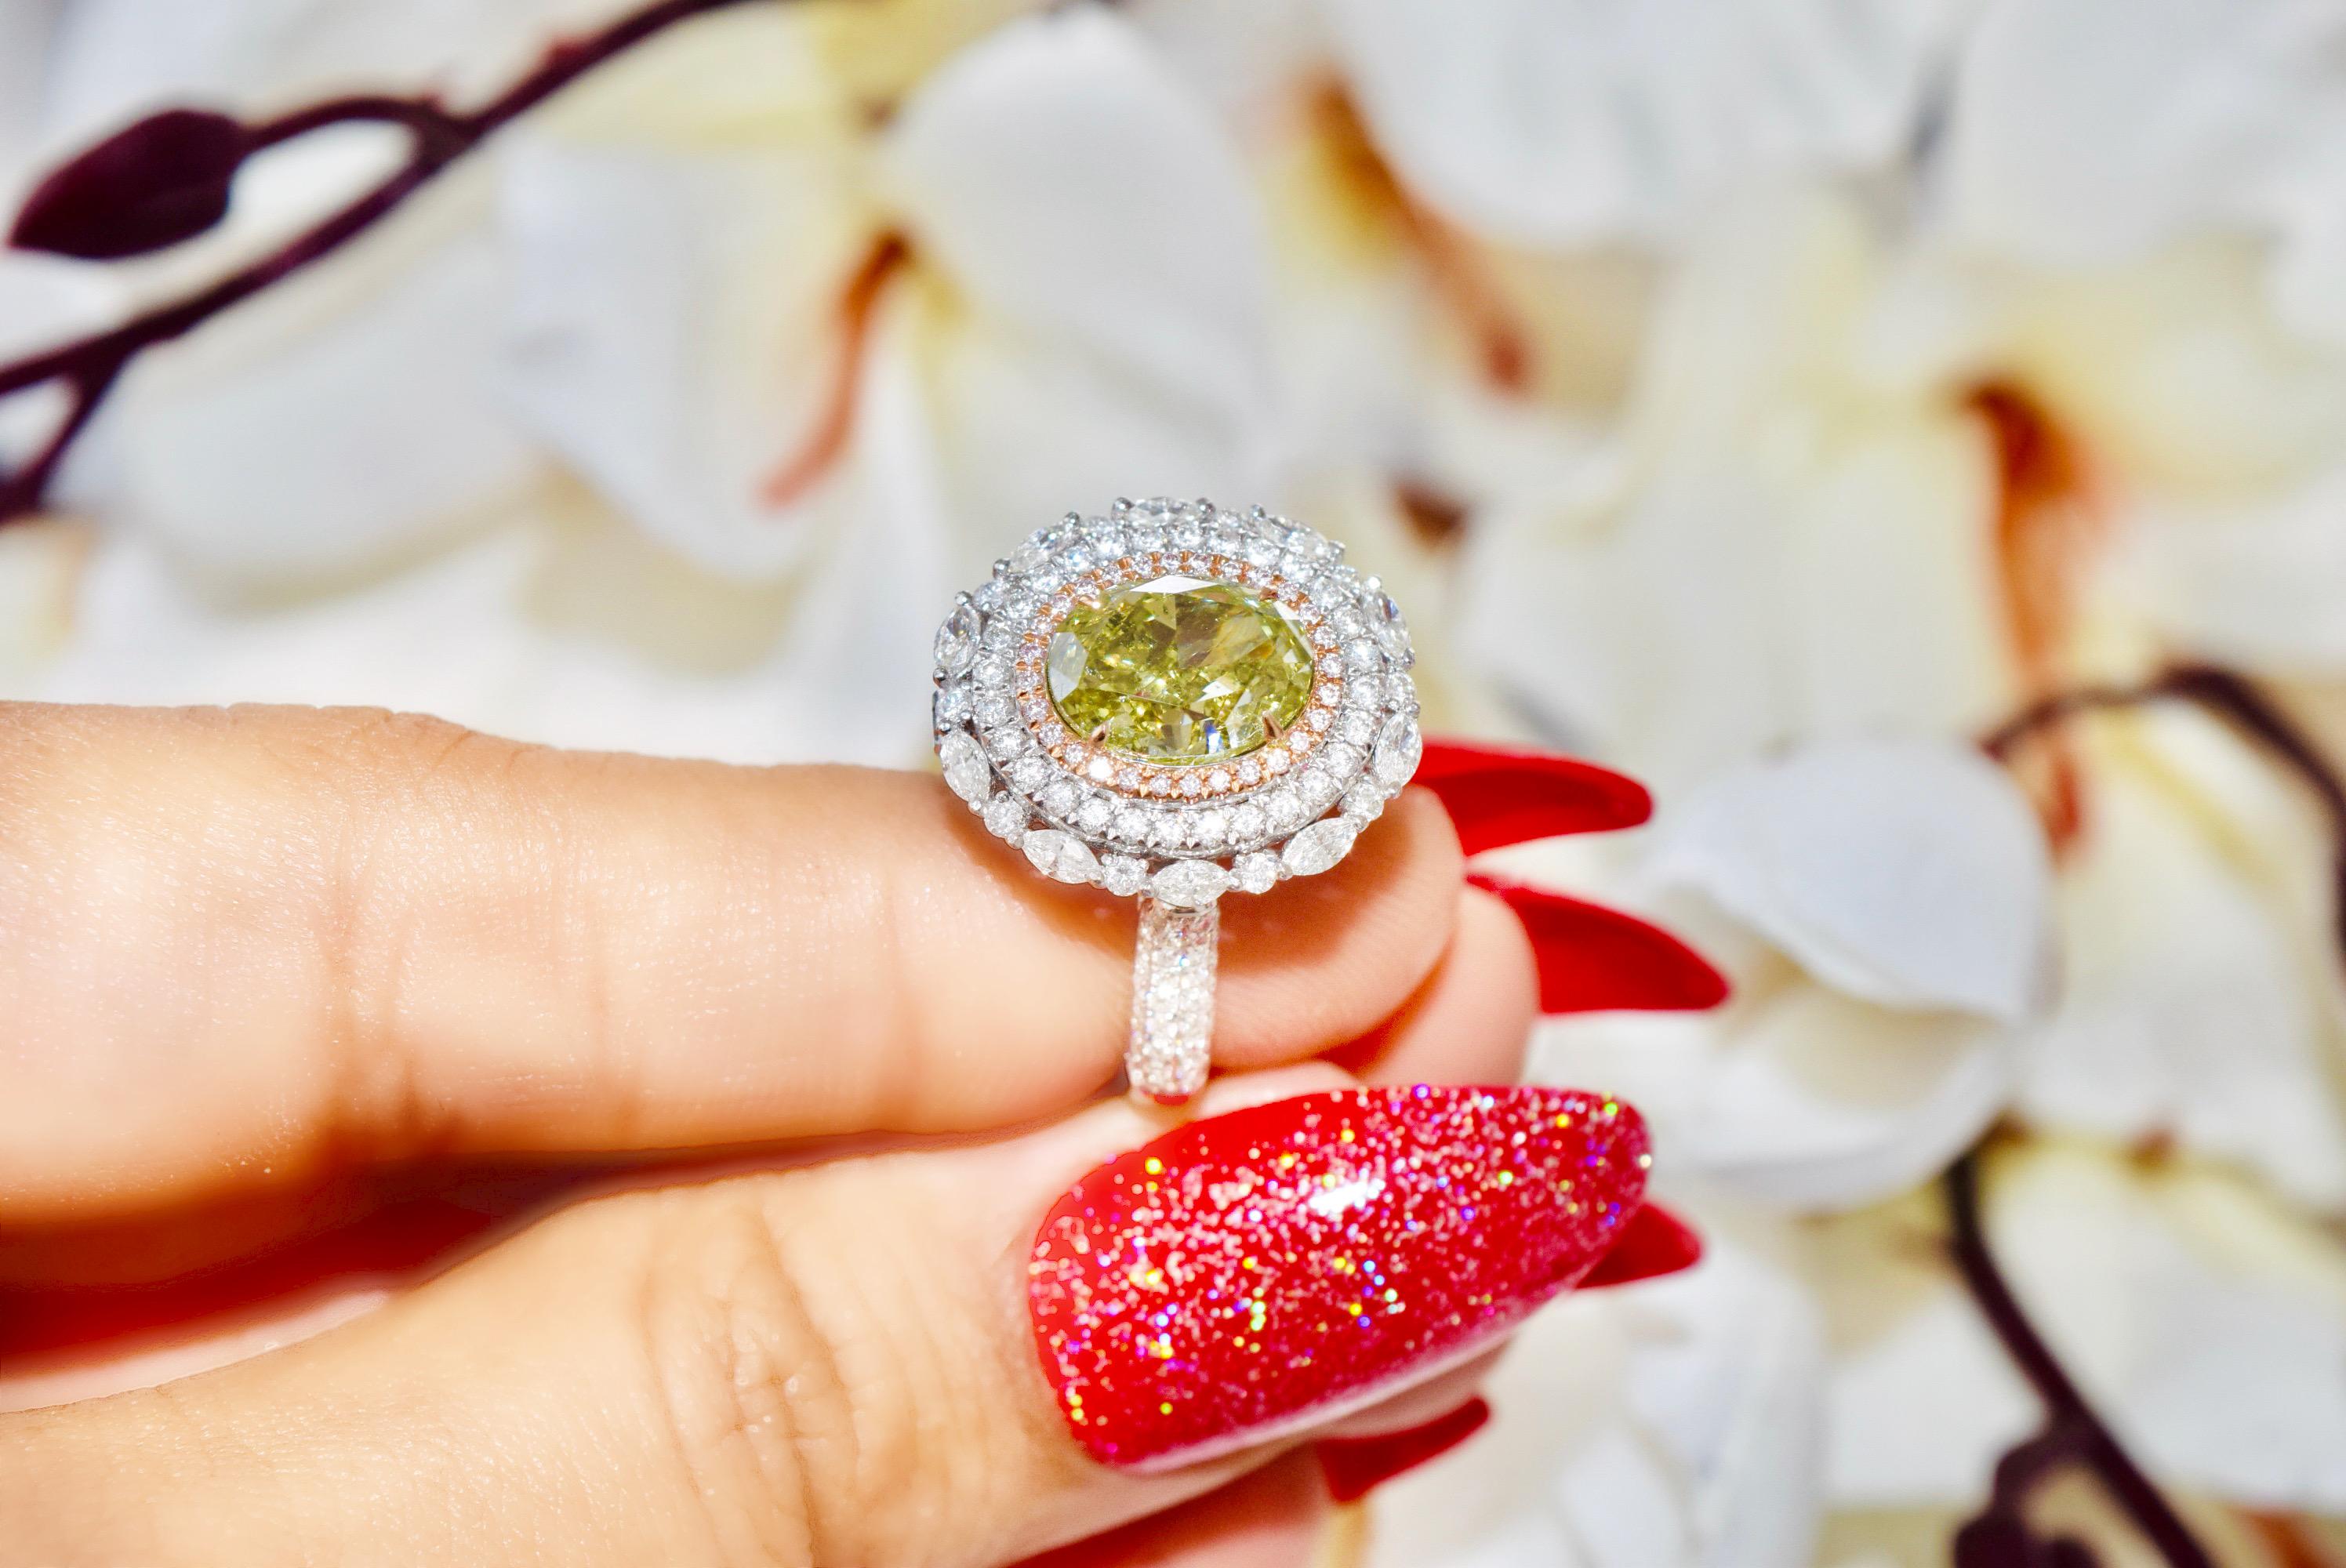 **100% NATURAL FANCY COLOUR DIAMOND JEWELLERY**

✪ Jewellery Details ✪

♦ MAIN STONE DETAILS

➛ Stone Shape: Oval
➛ Stone Color: Fancy Grayish Yellowish Green
➛ Stone Weight: 2.21 carat
➛ Clarity: SI2
➛ GIA certified

♦ SIDE STONE DETAILS

➛ Side